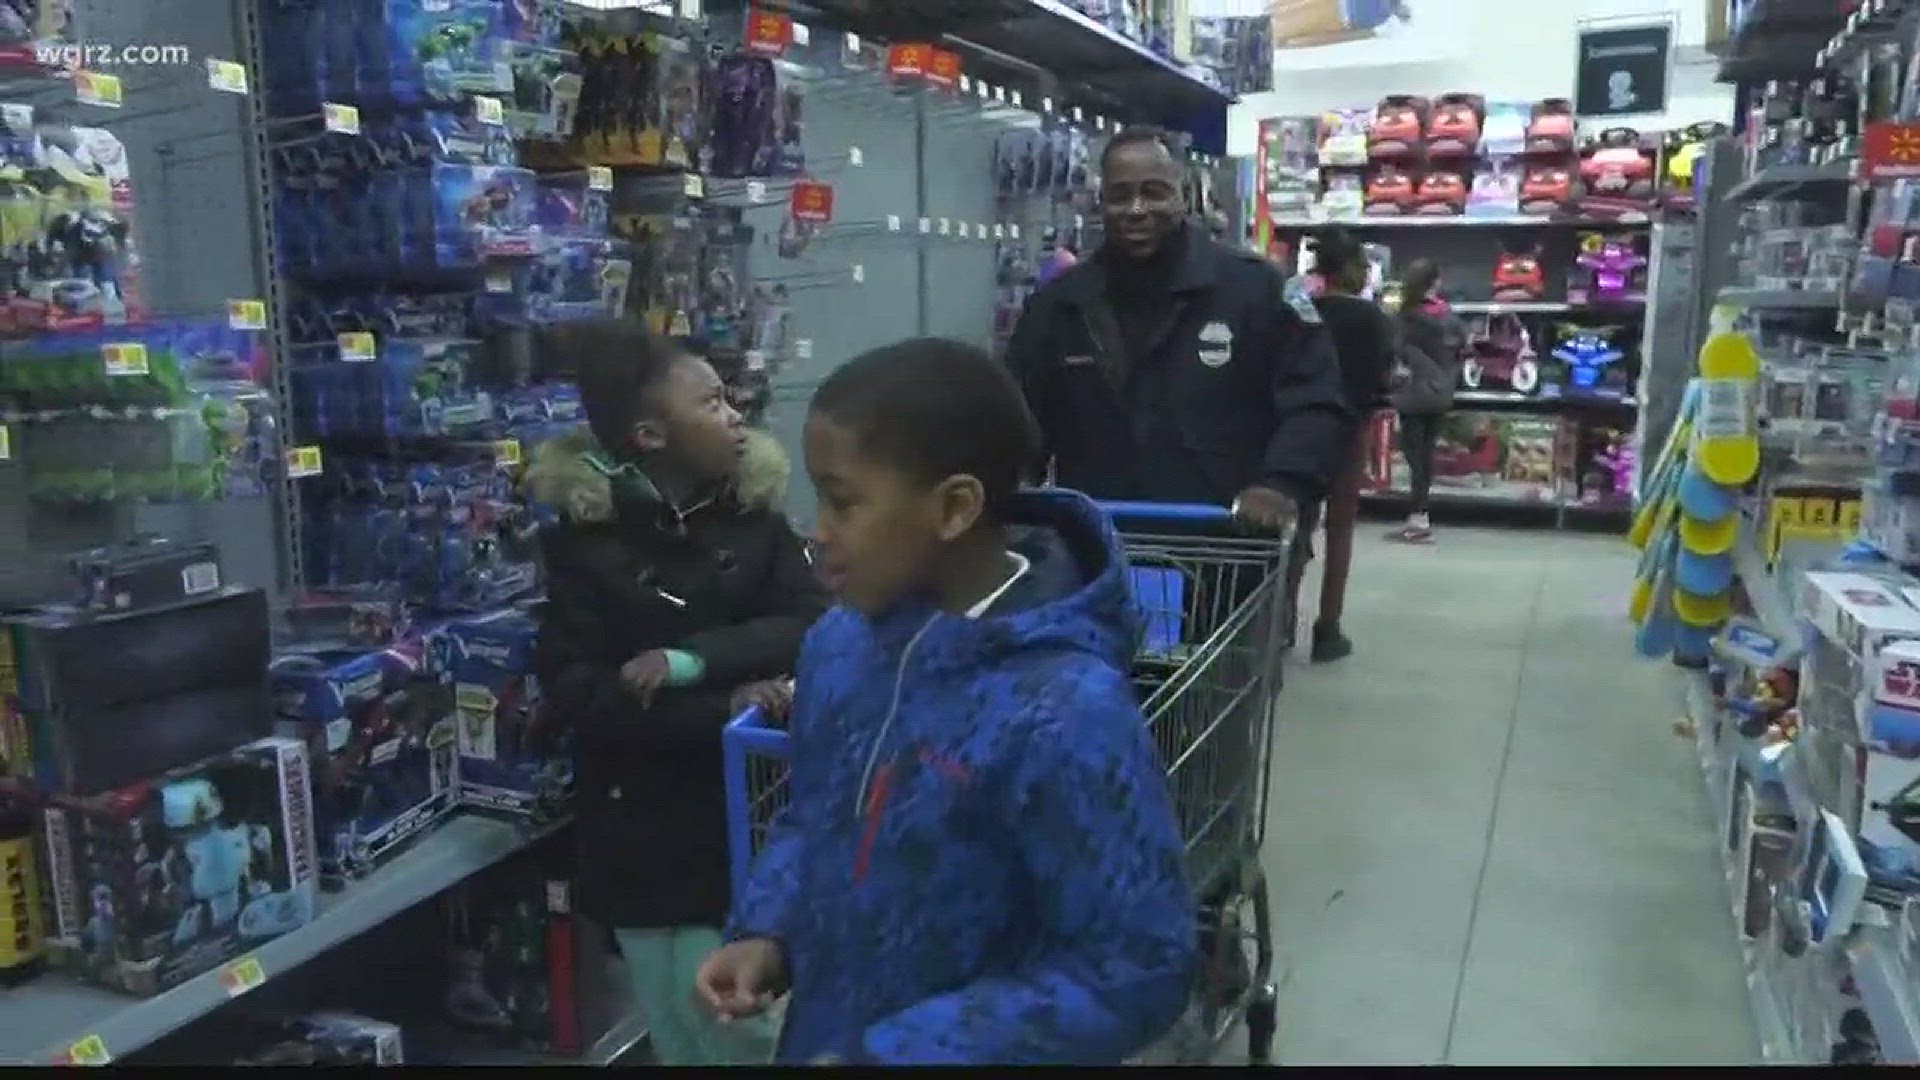 Buffalo police officers treat children to shopping spree